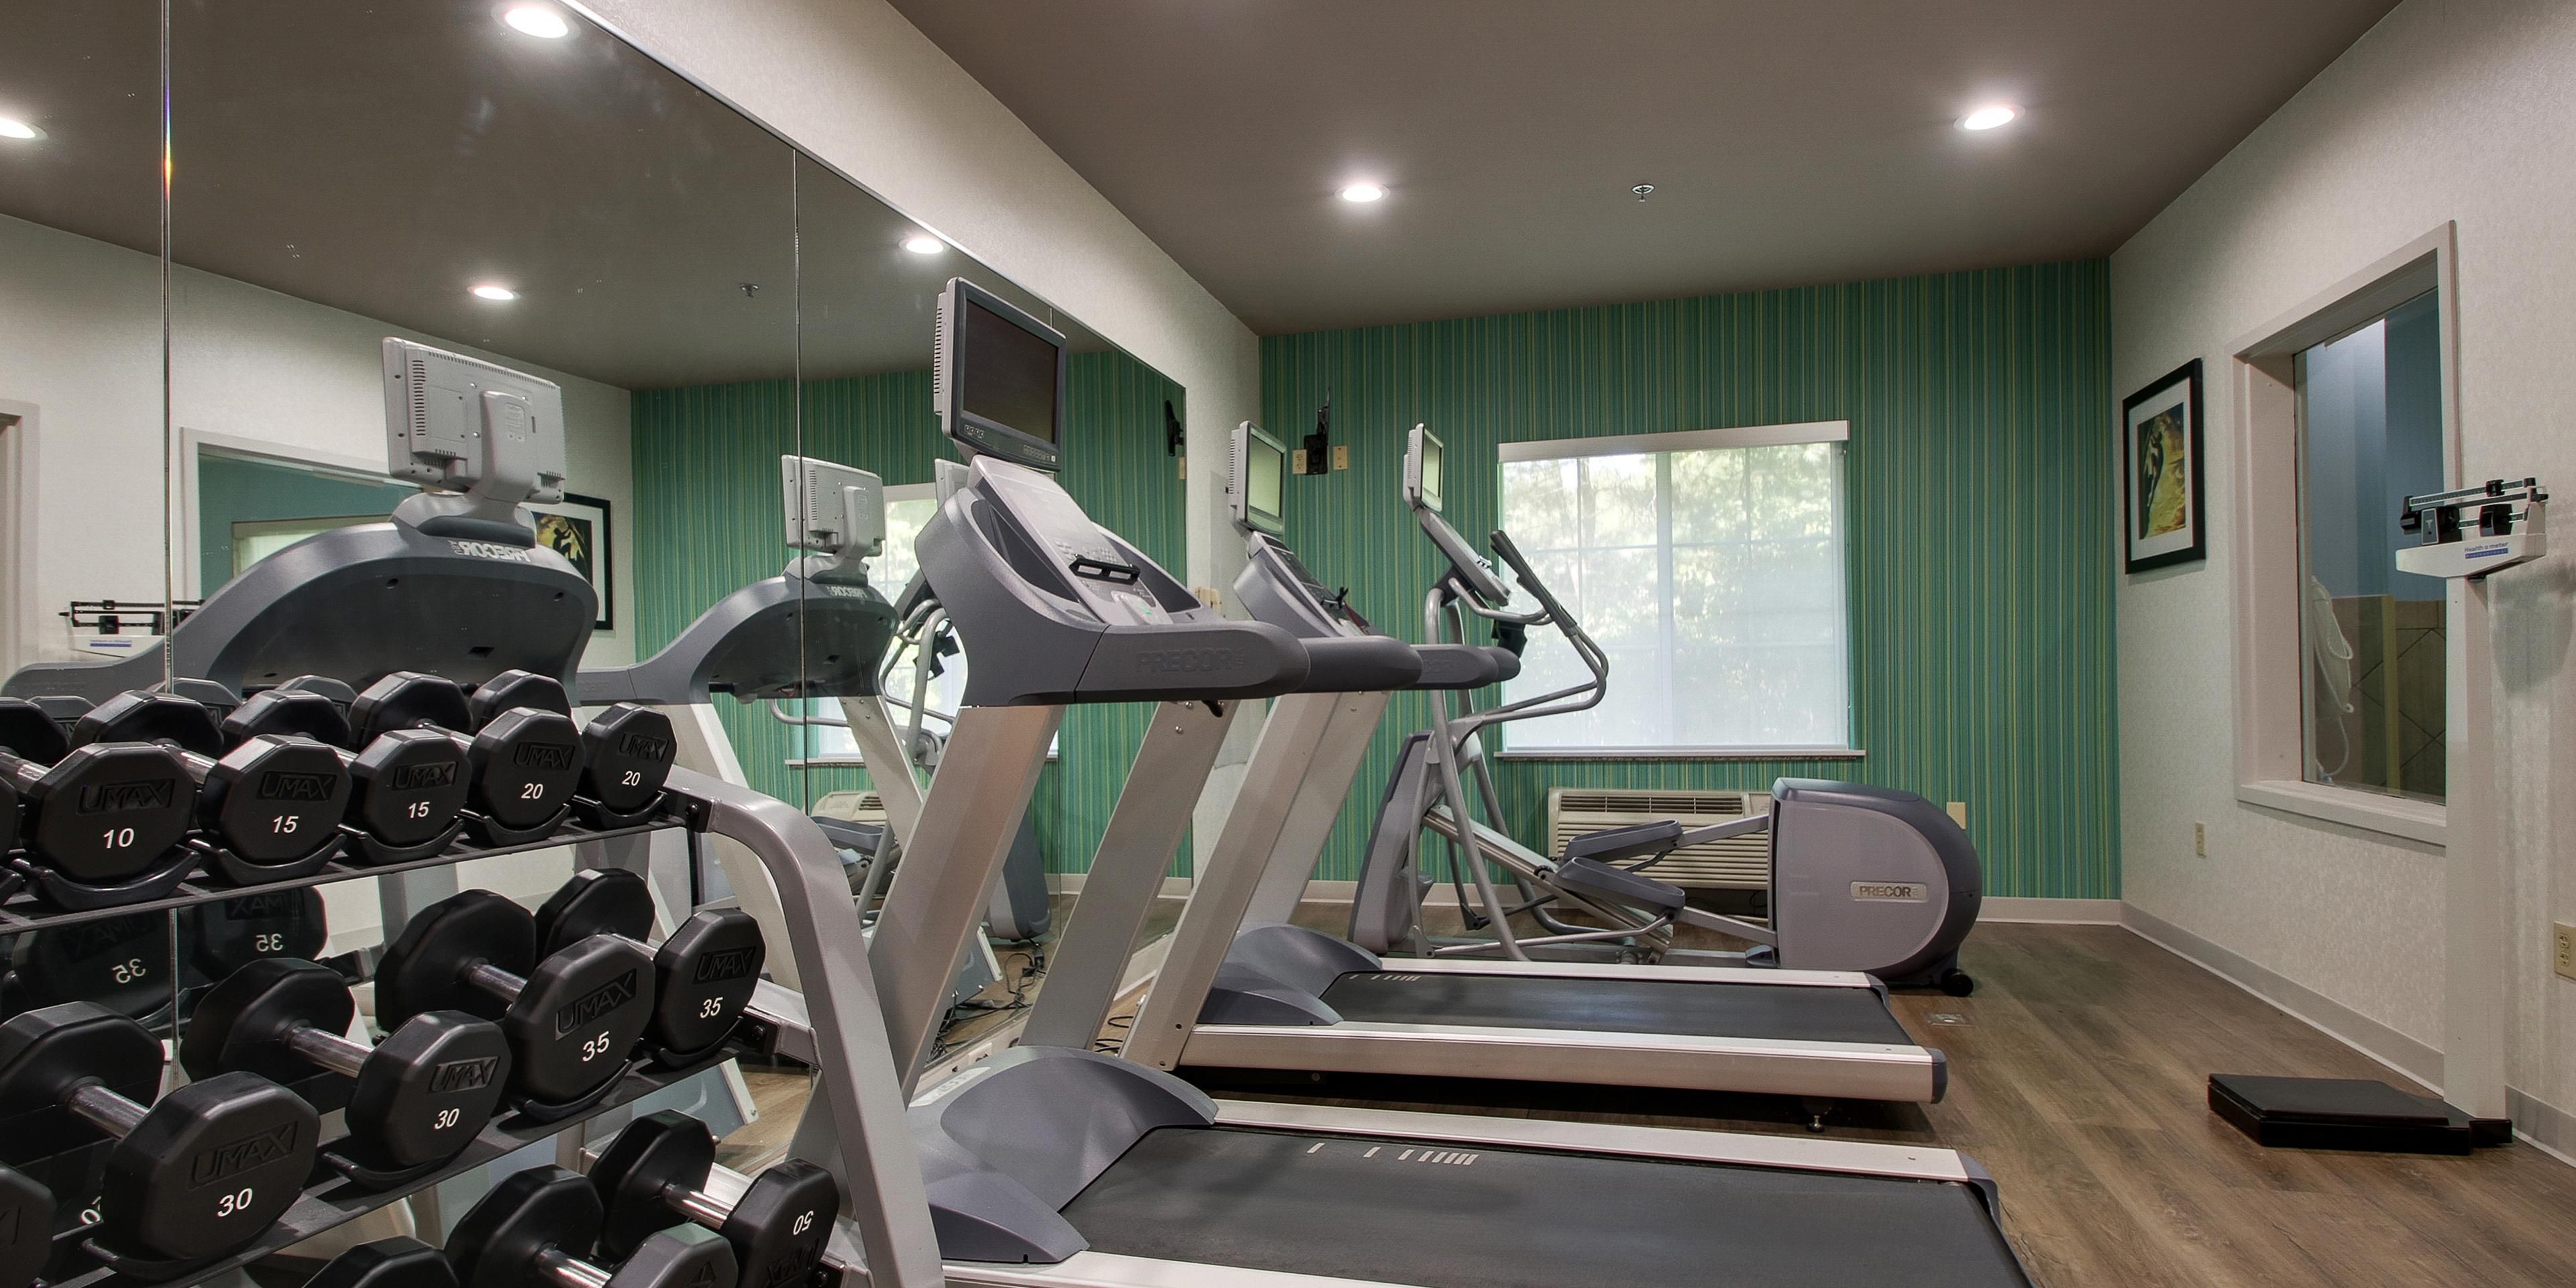 We offer a 24-hour fitness center with an elliptical, treadmill and free weights to keep up your workout while you are away from home. 